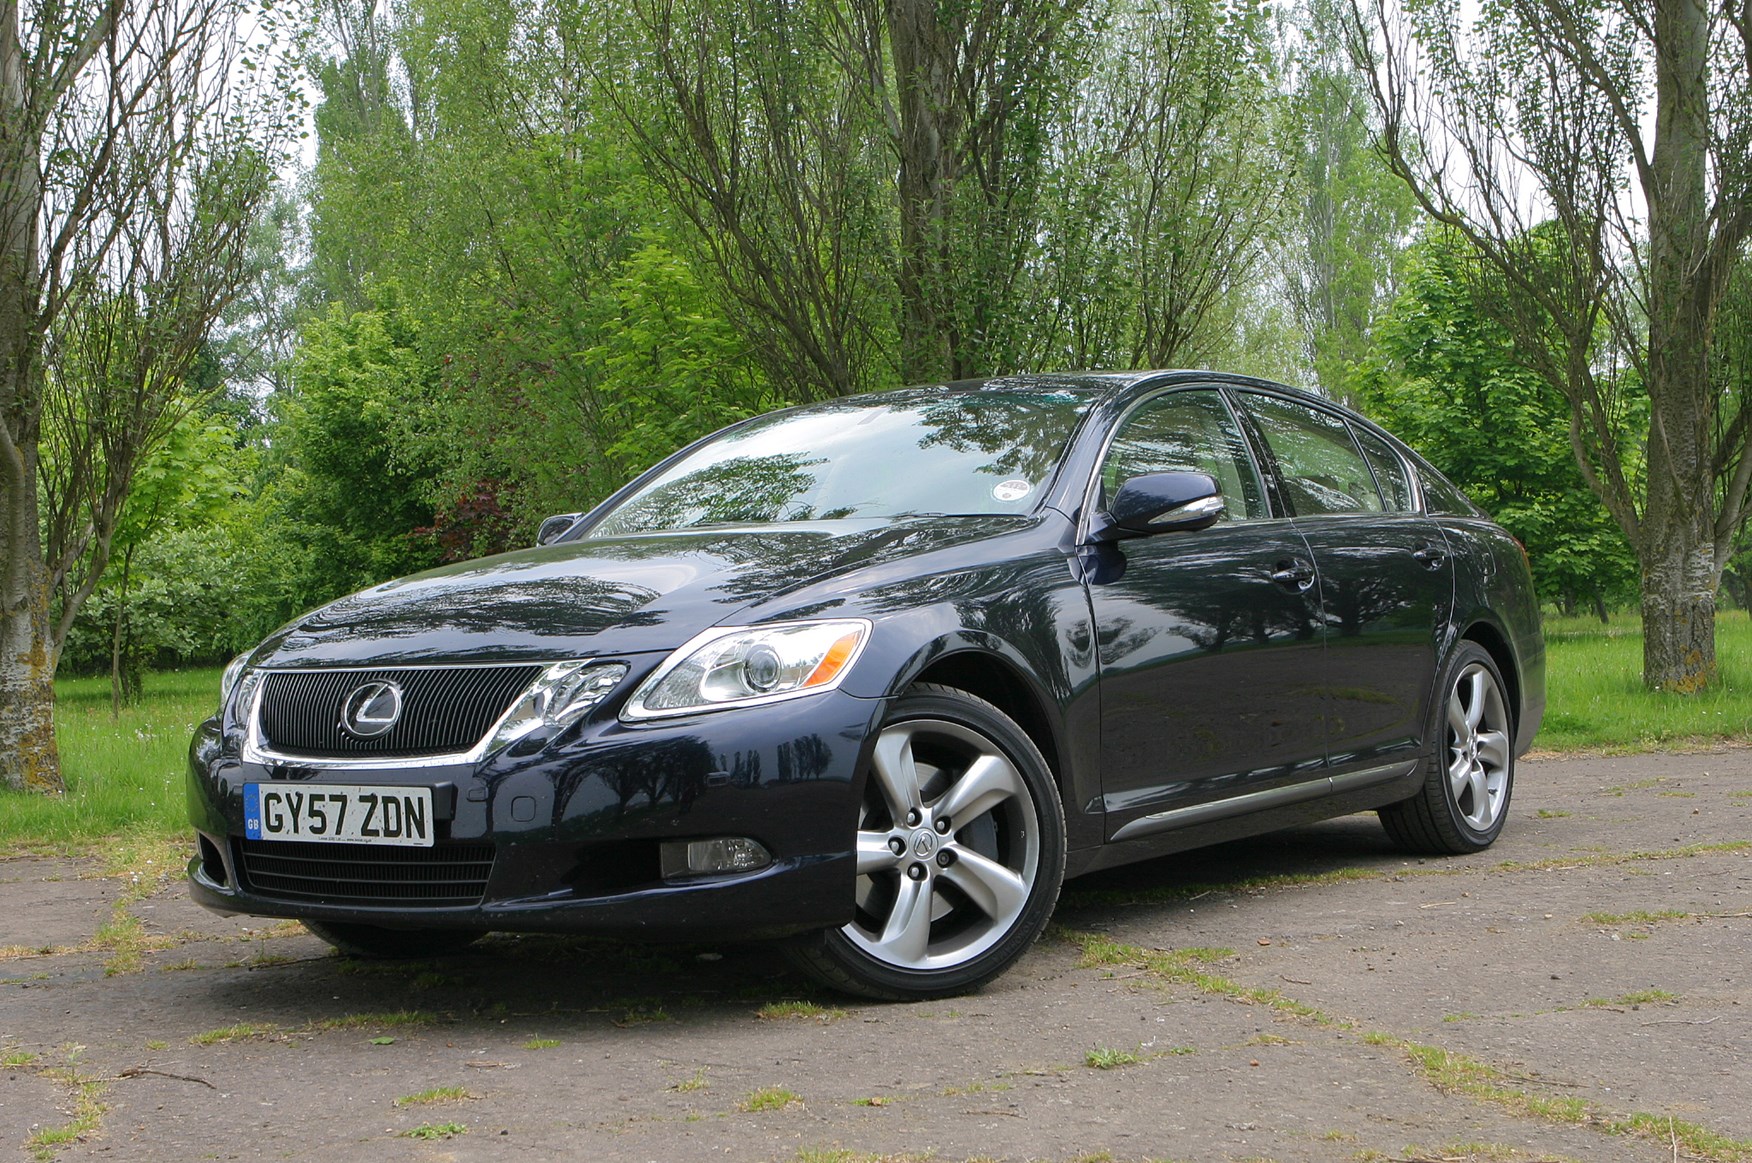 Used Lexus Gs Saloon 05 11 Review Parkers